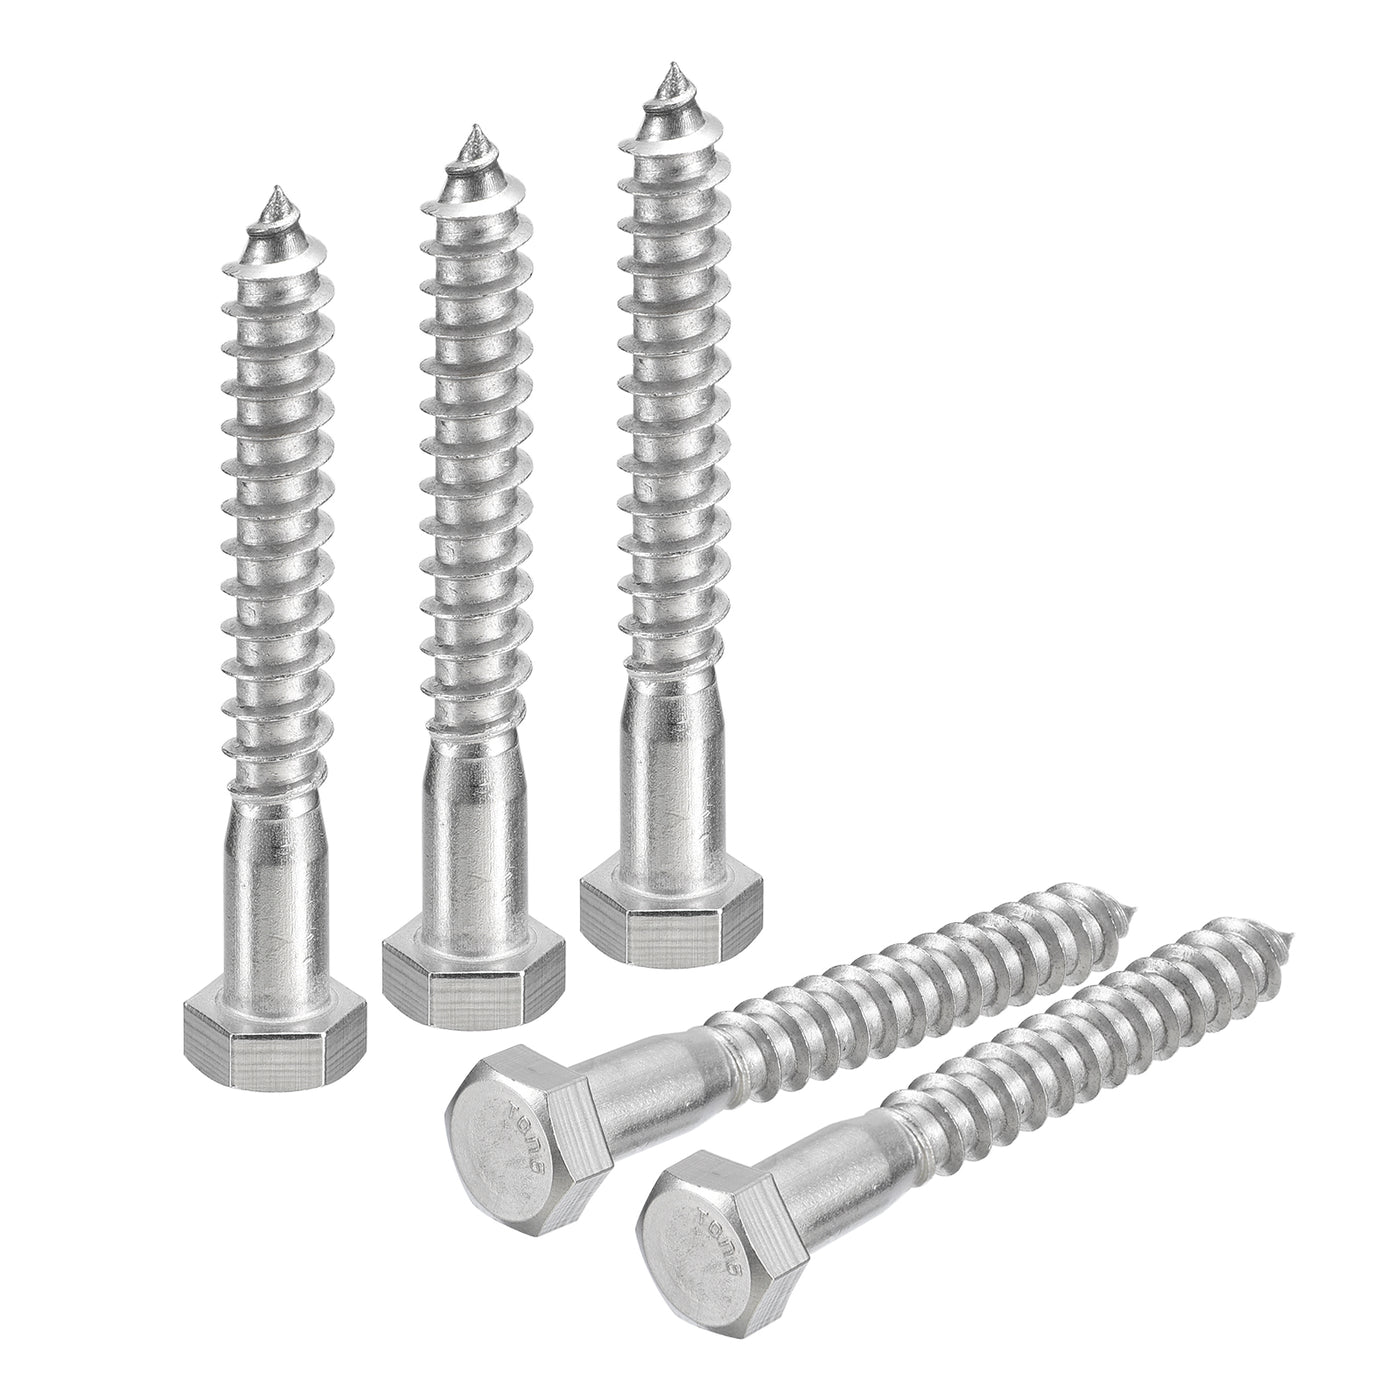 uxcell Uxcell Hex Head Lag Screws Bolts, 5pcs 3/8" x 3" 304 Stainless Steel Wood Screws